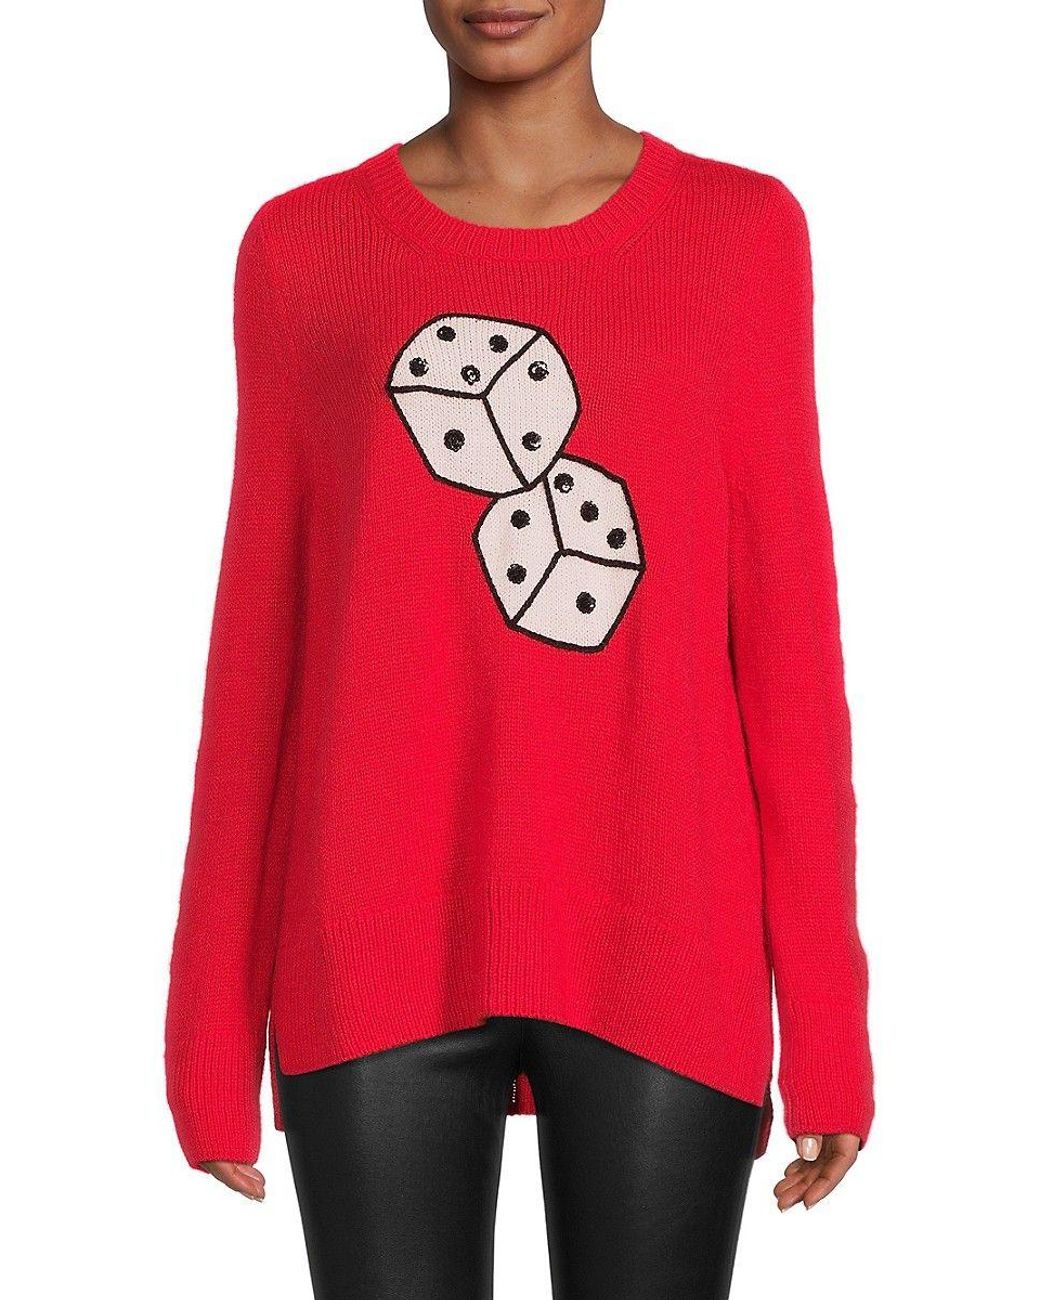 Kate Spade Dice Wool Blend High Low Sweater in Red